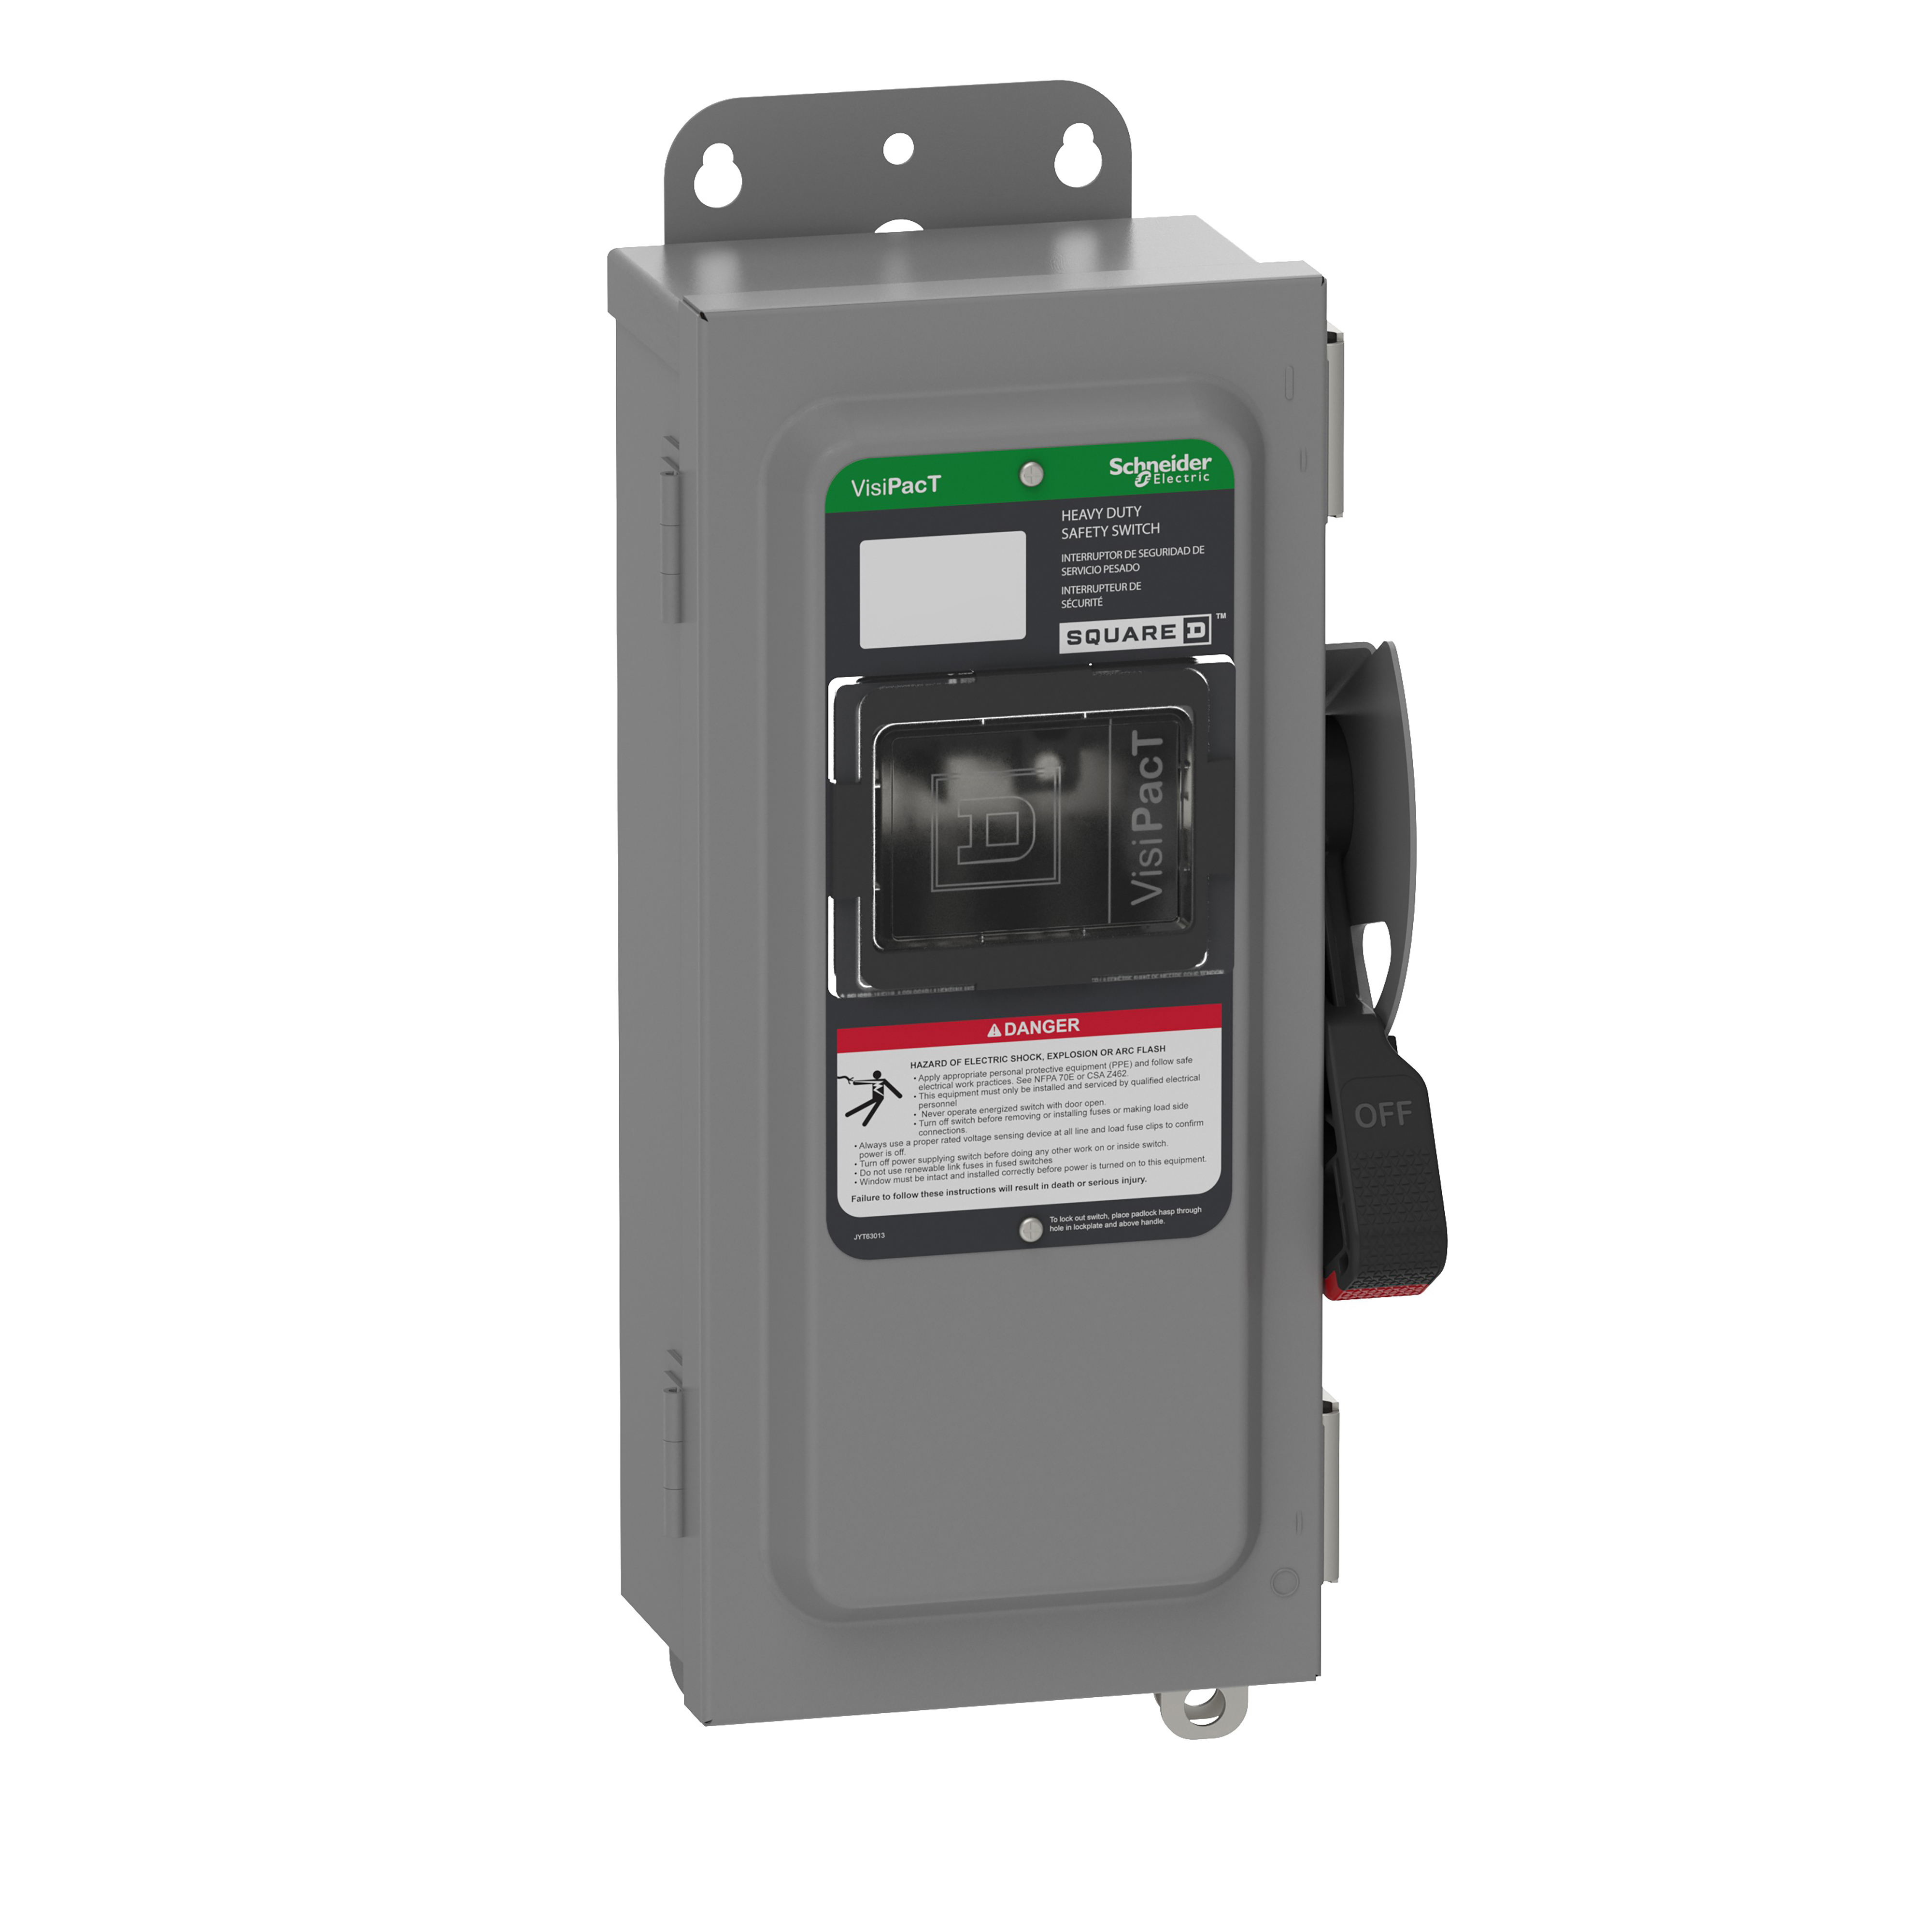 Safety switch, heavy duty, fused, viewing window, NEMA 12, 240V, 30A, 3 pole, neutral installed, ground lugs